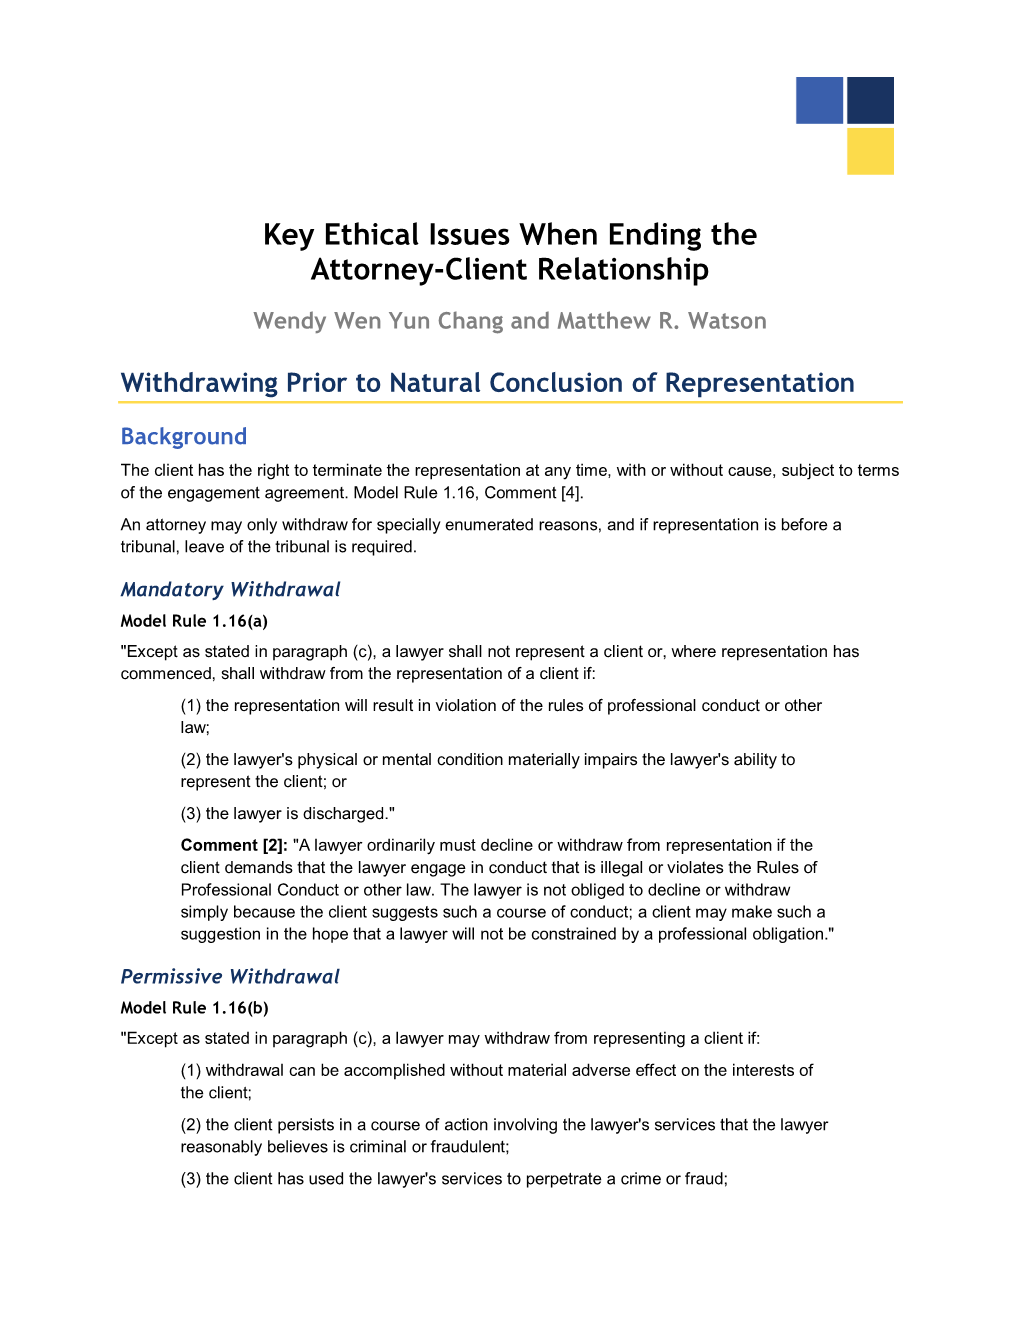 Key Ethical Issues When Ending the Attorney-Client Relationship